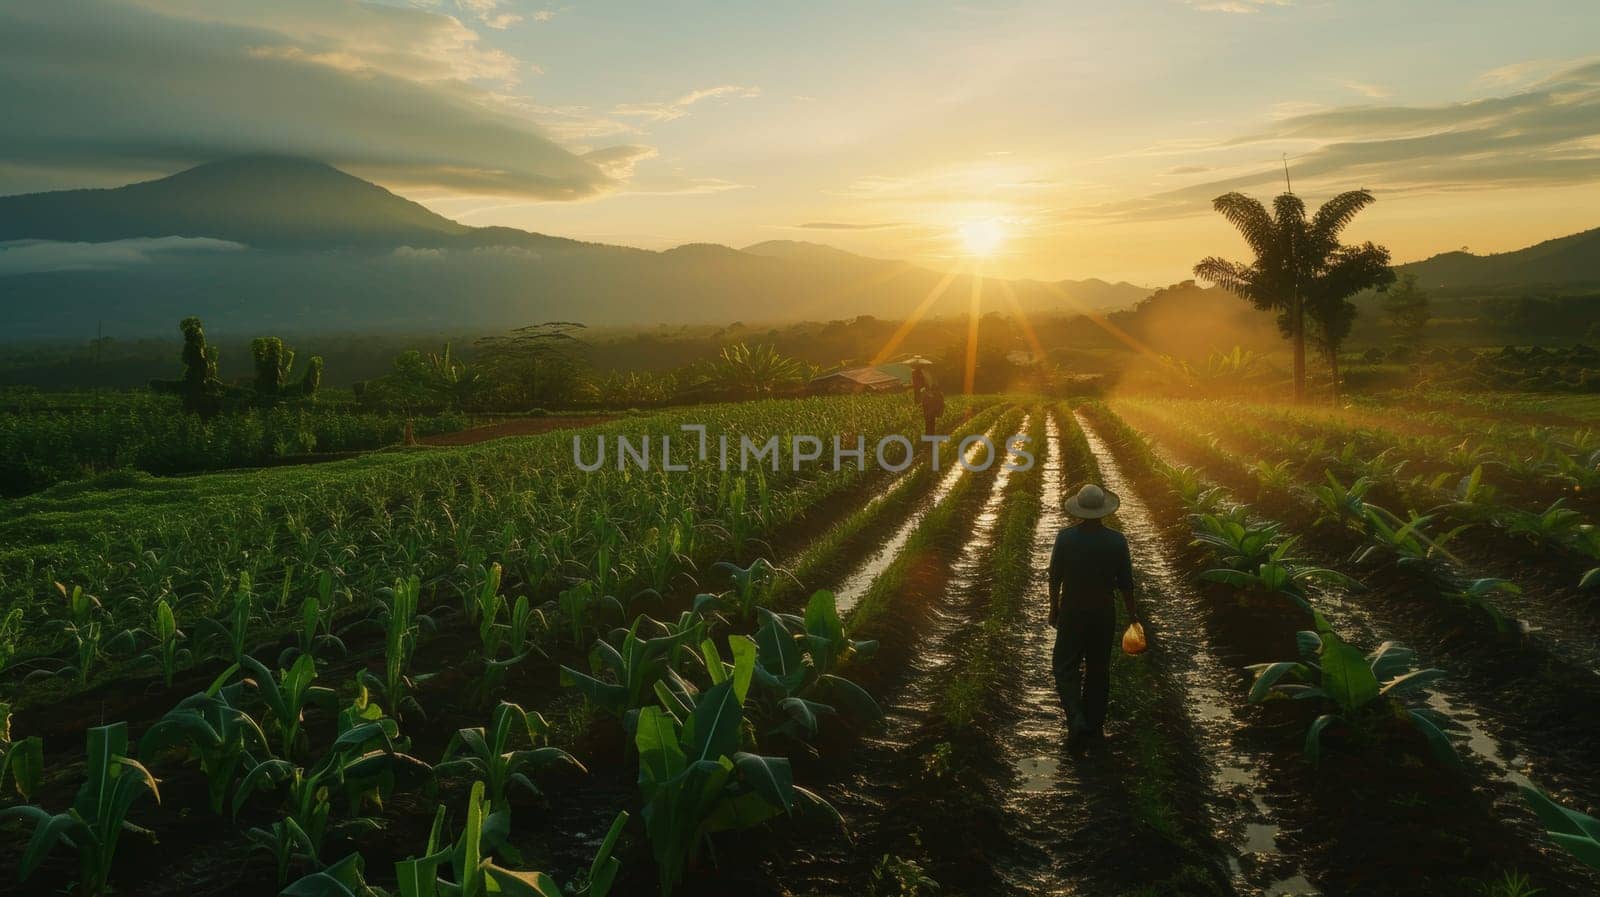 Farmers working the land during sunrise, with rays of light piercing through the mountainous backdrop on a lush farm